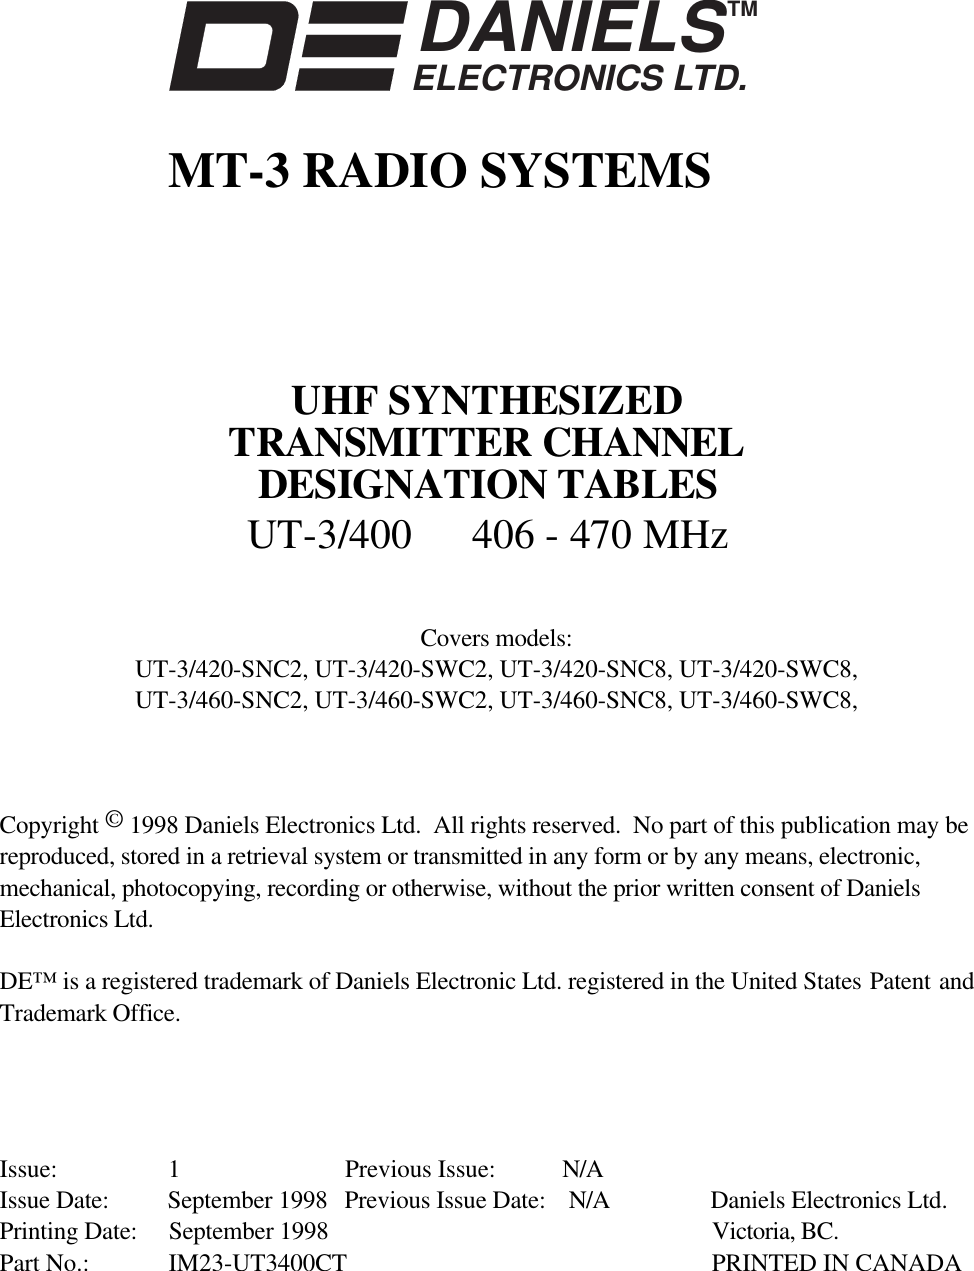 DANIELSELECTRONICS LTD.TMMT-3 RADIO SYSTEMSUHF SYNTHESIZEDTRANSMITTER CHANNELDESIGNATION TABLESUT-3/400 406 - 470 MHzCovers models:UT-3/420-SNC2, UT-3/420-SWC2, UT-3/420-SNC8, UT-3/420-SWC8,UT-3/460-SNC2, UT-3/460-SWC2, UT-3/460-SNC8, UT-3/460-SWC8,Copyright © 1998 Daniels Electronics Ltd.  All rights reserved.  No part of this publication may bereproduced, stored in a retrieval system or transmitted in any form or by any means, electronic,mechanical, photocopying, recording or otherwise, without the prior written consent of DanielsElectronics Ltd.DE™ is a registered trademark of Daniels Electronic Ltd. registered in the United States Patent andTrademark Office.Issue: 1 Previous Issue:  N/AIssue Date: September 1998 Previous Issue Date: N/A Daniels Electronics Ltd.Printing Date: September 1998 Victoria, BC.Part No.: IM23-UT3400CT  PRINTED IN CANADA